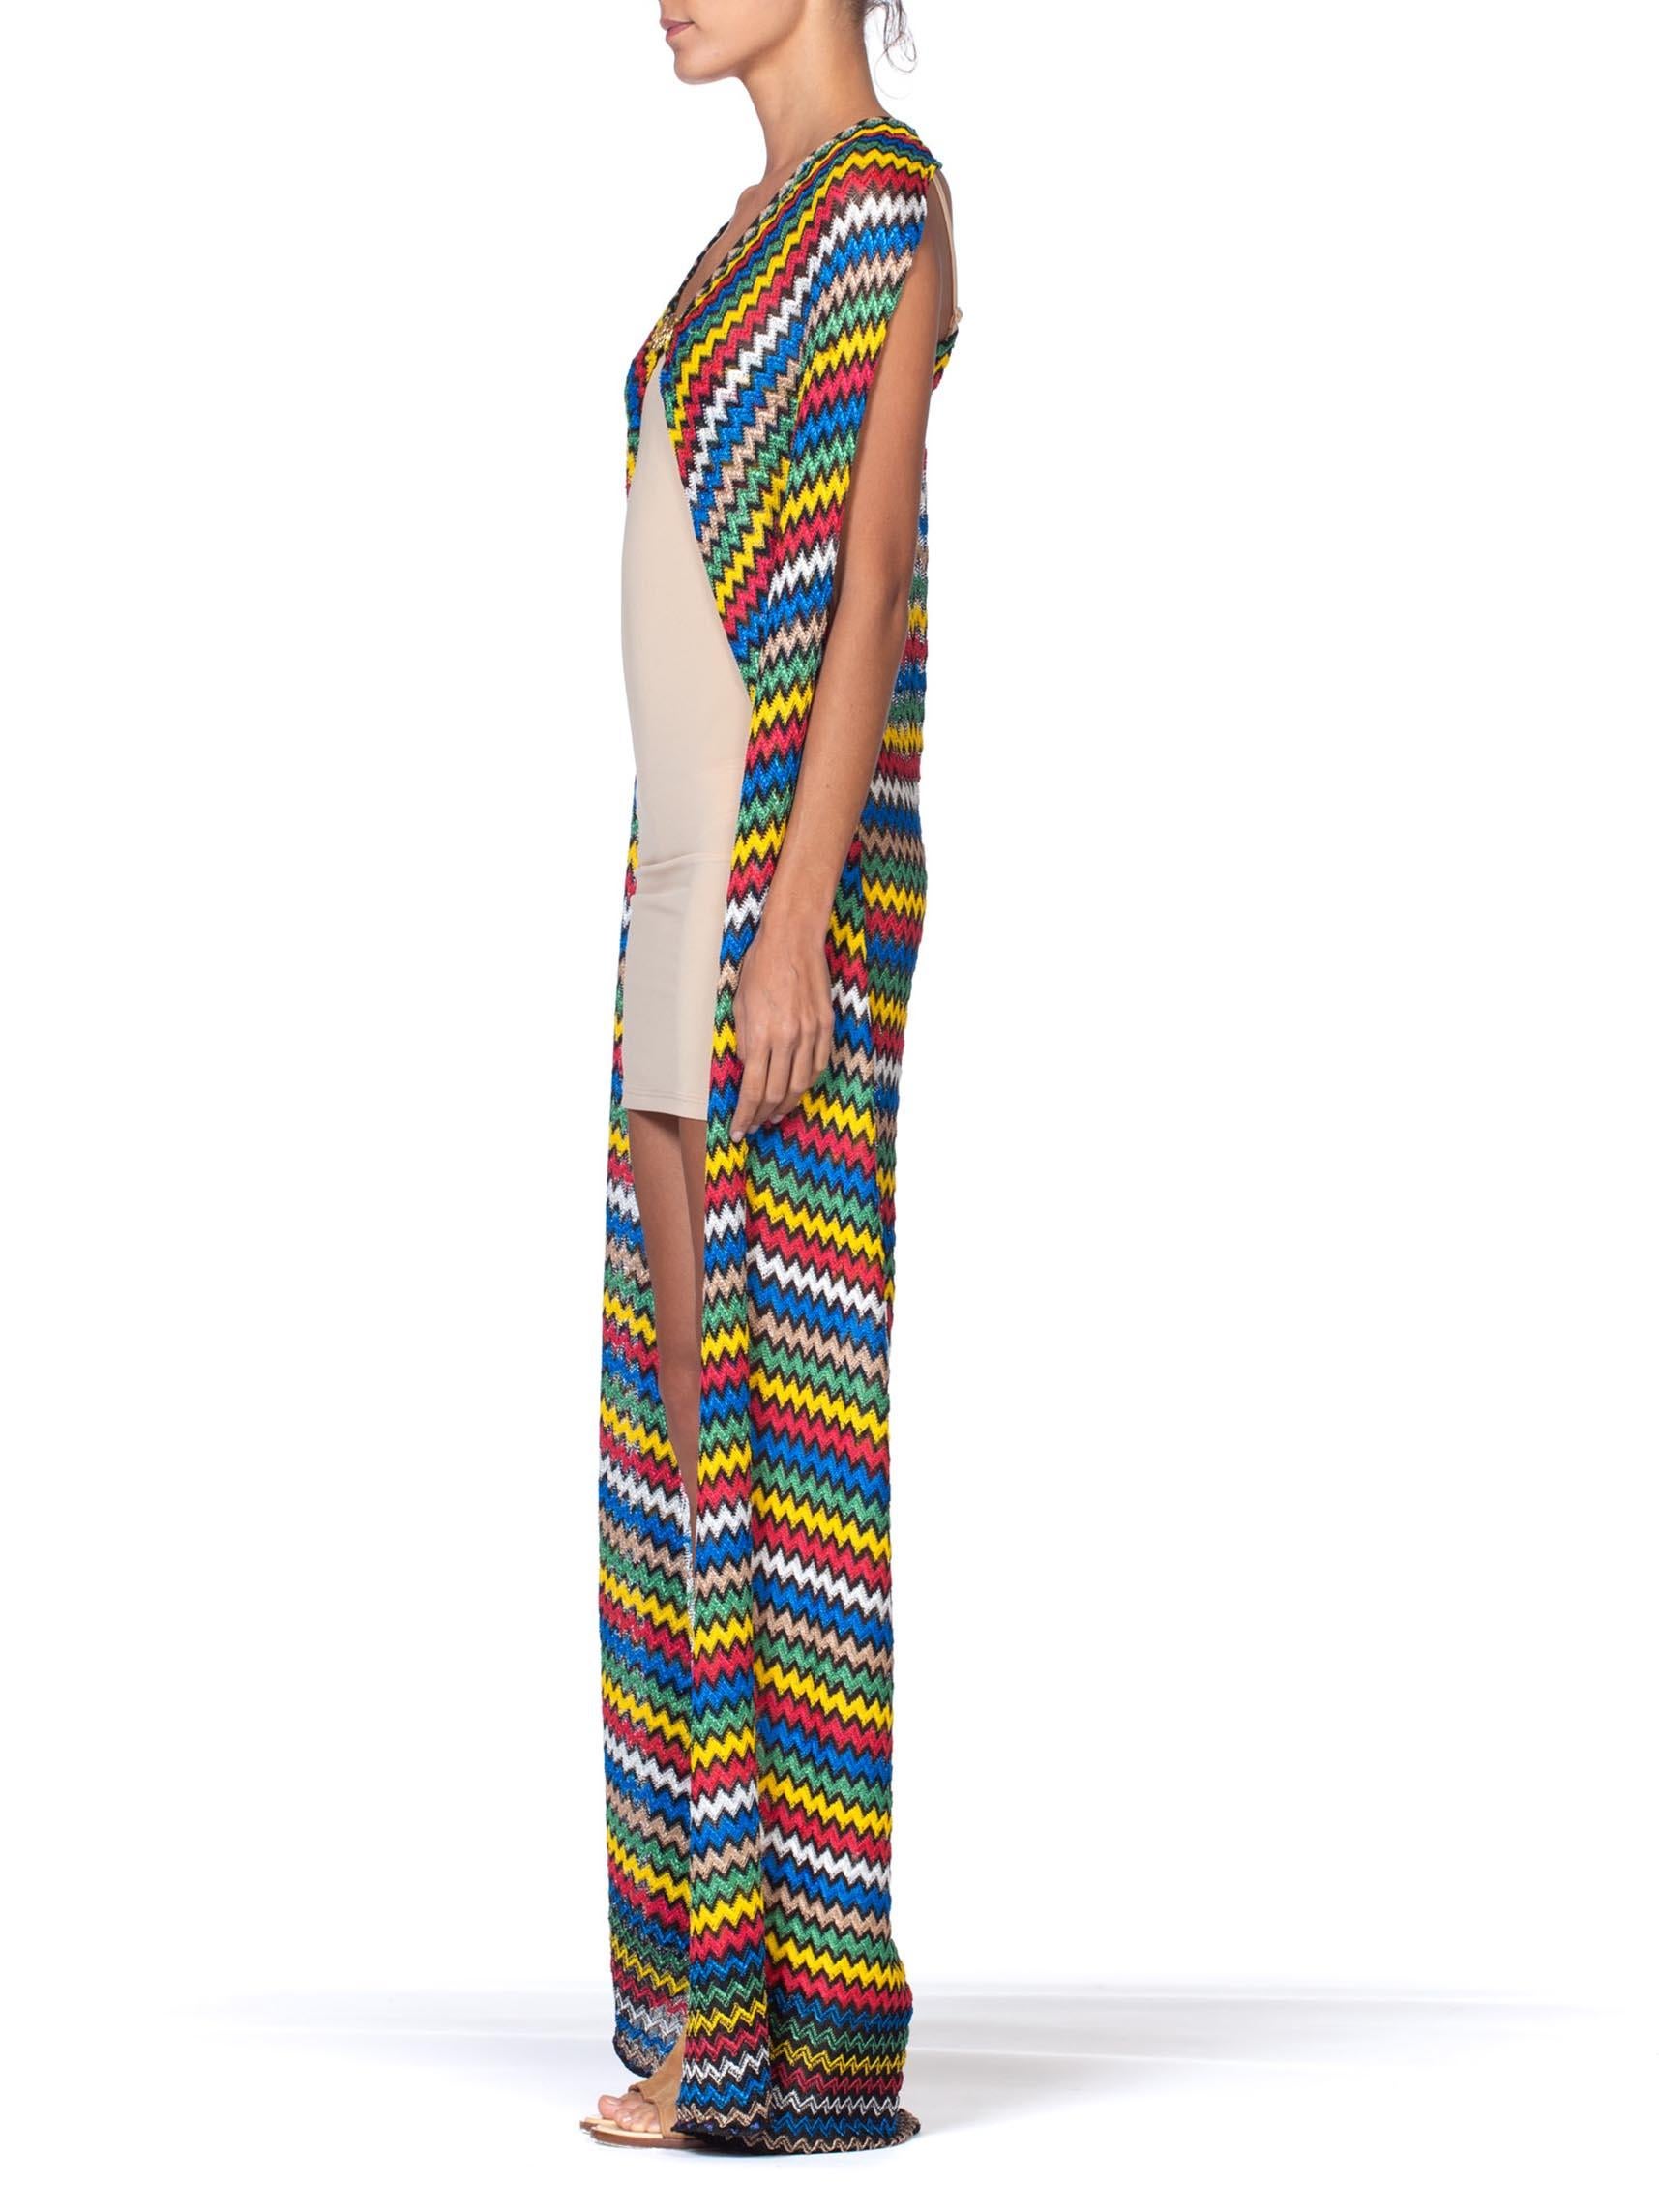 MORPHEW COLLECTION Multicolor Striped Knit Duster Top With Gold Parrot Clasp In Excellent Condition For Sale In New York, NY